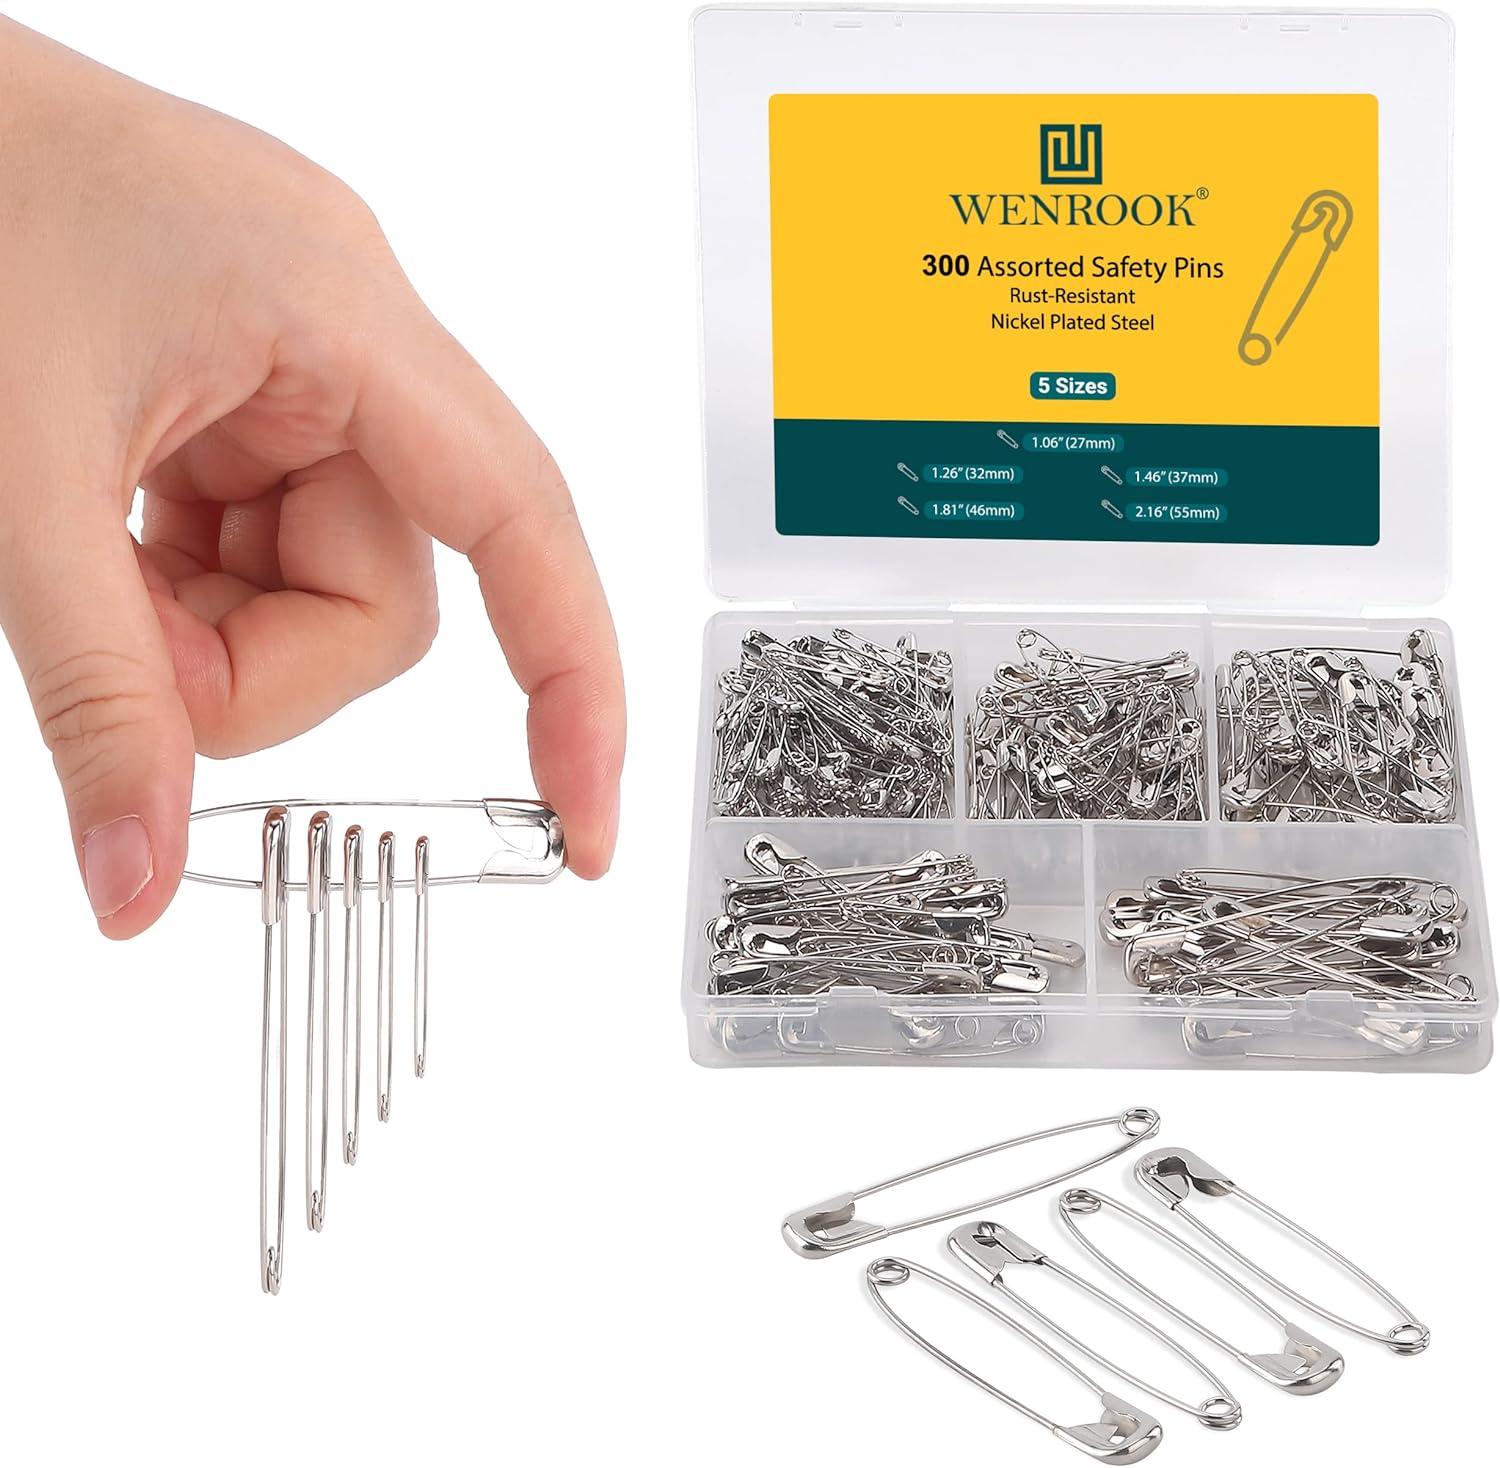 Wenrook Safety Pins Assorted 300 Pack Strong Nickel Plated Steel 5  Different Size Safety Pin Rust Resistant Large Safety Pins Heavy Duty  Safety Pins for Clothes Crafts Sewing and More